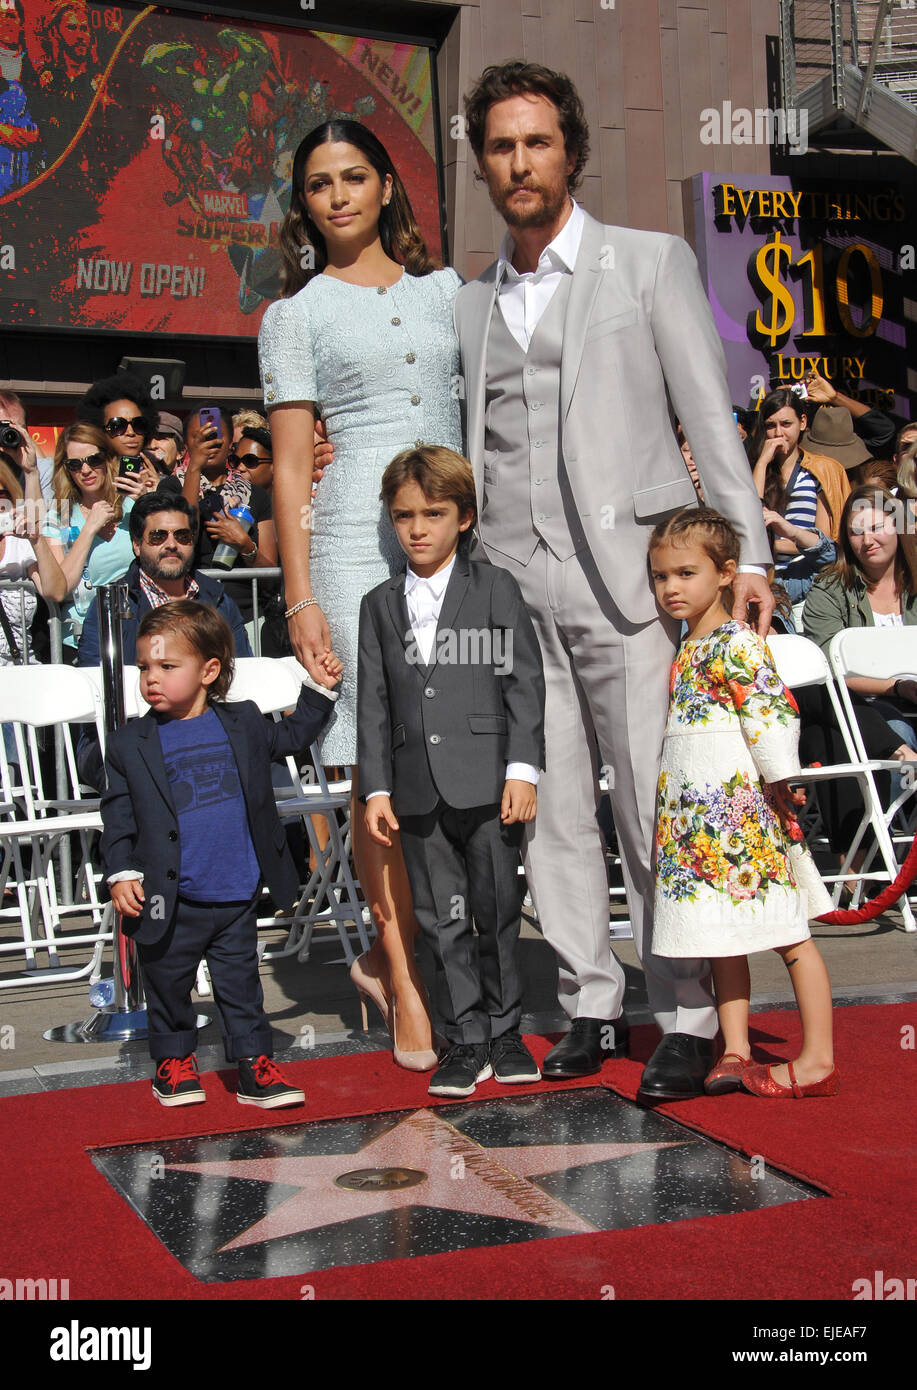 LOS ANGELES, CA - NOVEMBER 17, 2014: Actor Matthew McConaughey & wife Camilla Alves & children on Hollywood Boulevard where he was honored with the 2,534th star on the Hollywood Walk of Fame. Stock Photo